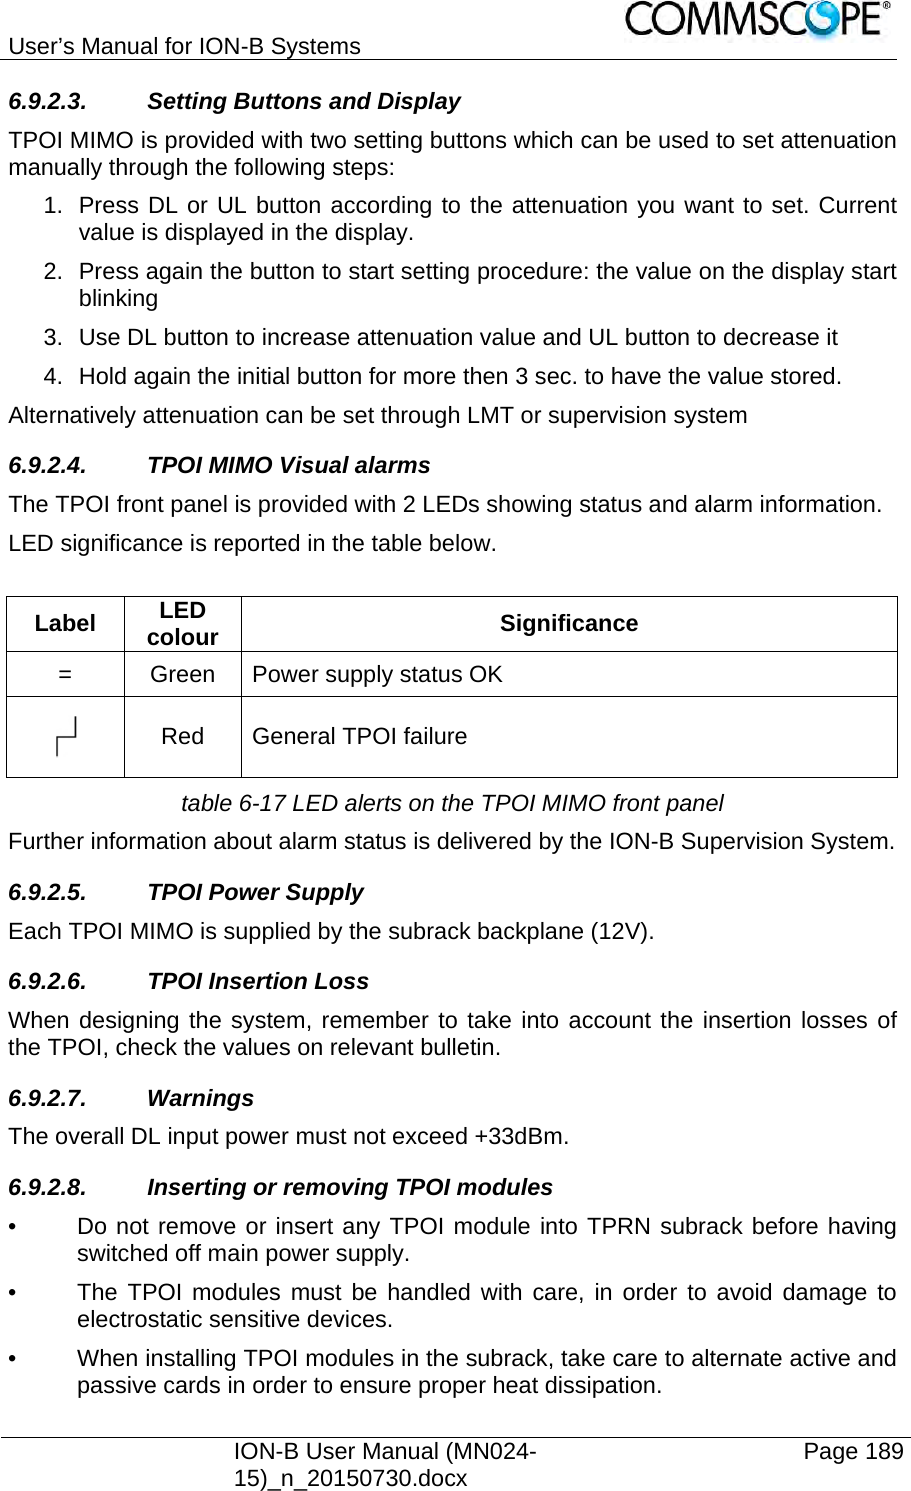 User’s Manual for ION-B Systems    ION-B User Manual (MN024-15)_n_20150730.docx  Page 189 6.9.2.3.  Setting Buttons and Display TPOI MIMO is provided with two setting buttons which can be used to set attenuation manually through the following steps: 1.  Press DL or UL button according to the attenuation you want to set. Current value is displayed in the display. 2.  Press again the button to start setting procedure: the value on the display start blinking 3.  Use DL button to increase attenuation value and UL button to decrease it 4.  Hold again the initial button for more then 3 sec. to have the value stored. Alternatively attenuation can be set through LMT or supervision system 6.9.2.4. TPOI MIMO Visual alarms  The TPOI front panel is provided with 2 LEDs showing status and alarm information.  LED significance is reported in the table below.  Label  LED colour  Significance =  Green  Power supply status OK  Red  General TPOI failure table 6-17 LED alerts on the TPOI MIMO front panel Further information about alarm status is delivered by the ION-B Supervision System. 6.9.2.5.  TPOI Power Supply  Each TPOI MIMO is supplied by the subrack backplane (12V). 6.9.2.6.  TPOI Insertion Loss  When designing the system, remember to take into account the insertion losses of the TPOI, check the values on relevant bulletin. 6.9.2.7. Warnings The overall DL input power must not exceed +33dBm.  6.9.2.8.  Inserting or removing TPOI modules •  Do not remove or insert any TPOI module into TPRN subrack before having switched off main power supply. •  The TPOI modules must be handled with care, in order to avoid damage to electrostatic sensitive devices. •  When installing TPOI modules in the subrack, take care to alternate active and passive cards in order to ensure proper heat dissipation. 